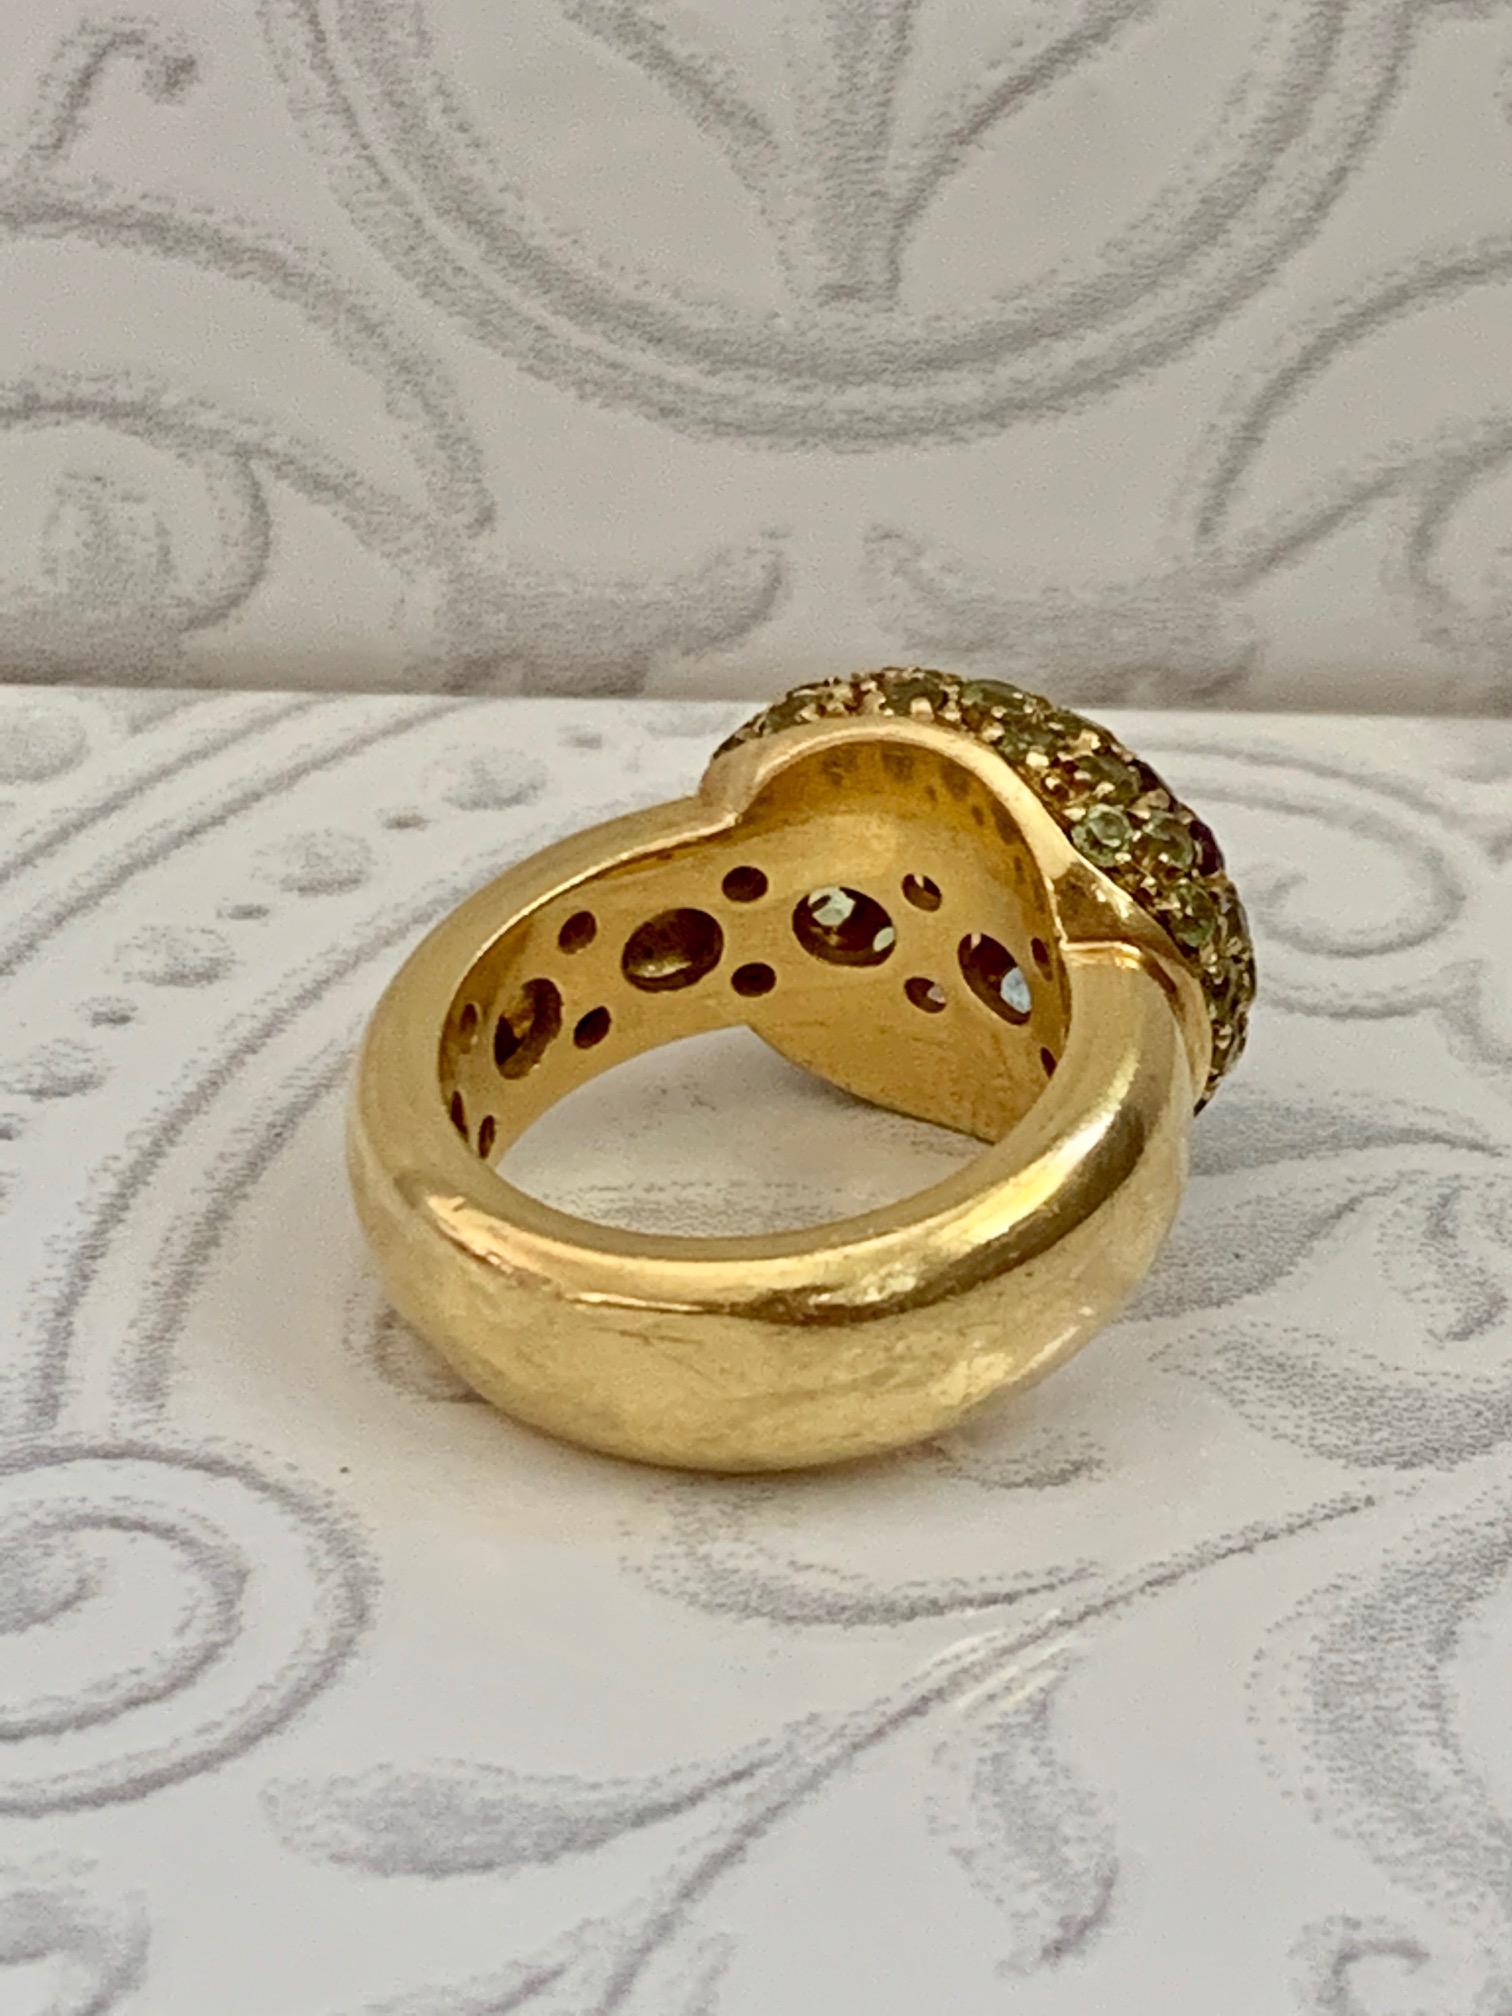 SUCH A PRETTY MULTI-COLOR, SUMMER FLOWER RING
This 18k yellow gold  Fashion ring has a comfortable wide yellow gold band  
domed Flower design which contains 2.5mm round faceted stones including: Peridot, Amethyst, Citrine, Pink Tourmaline and Blue